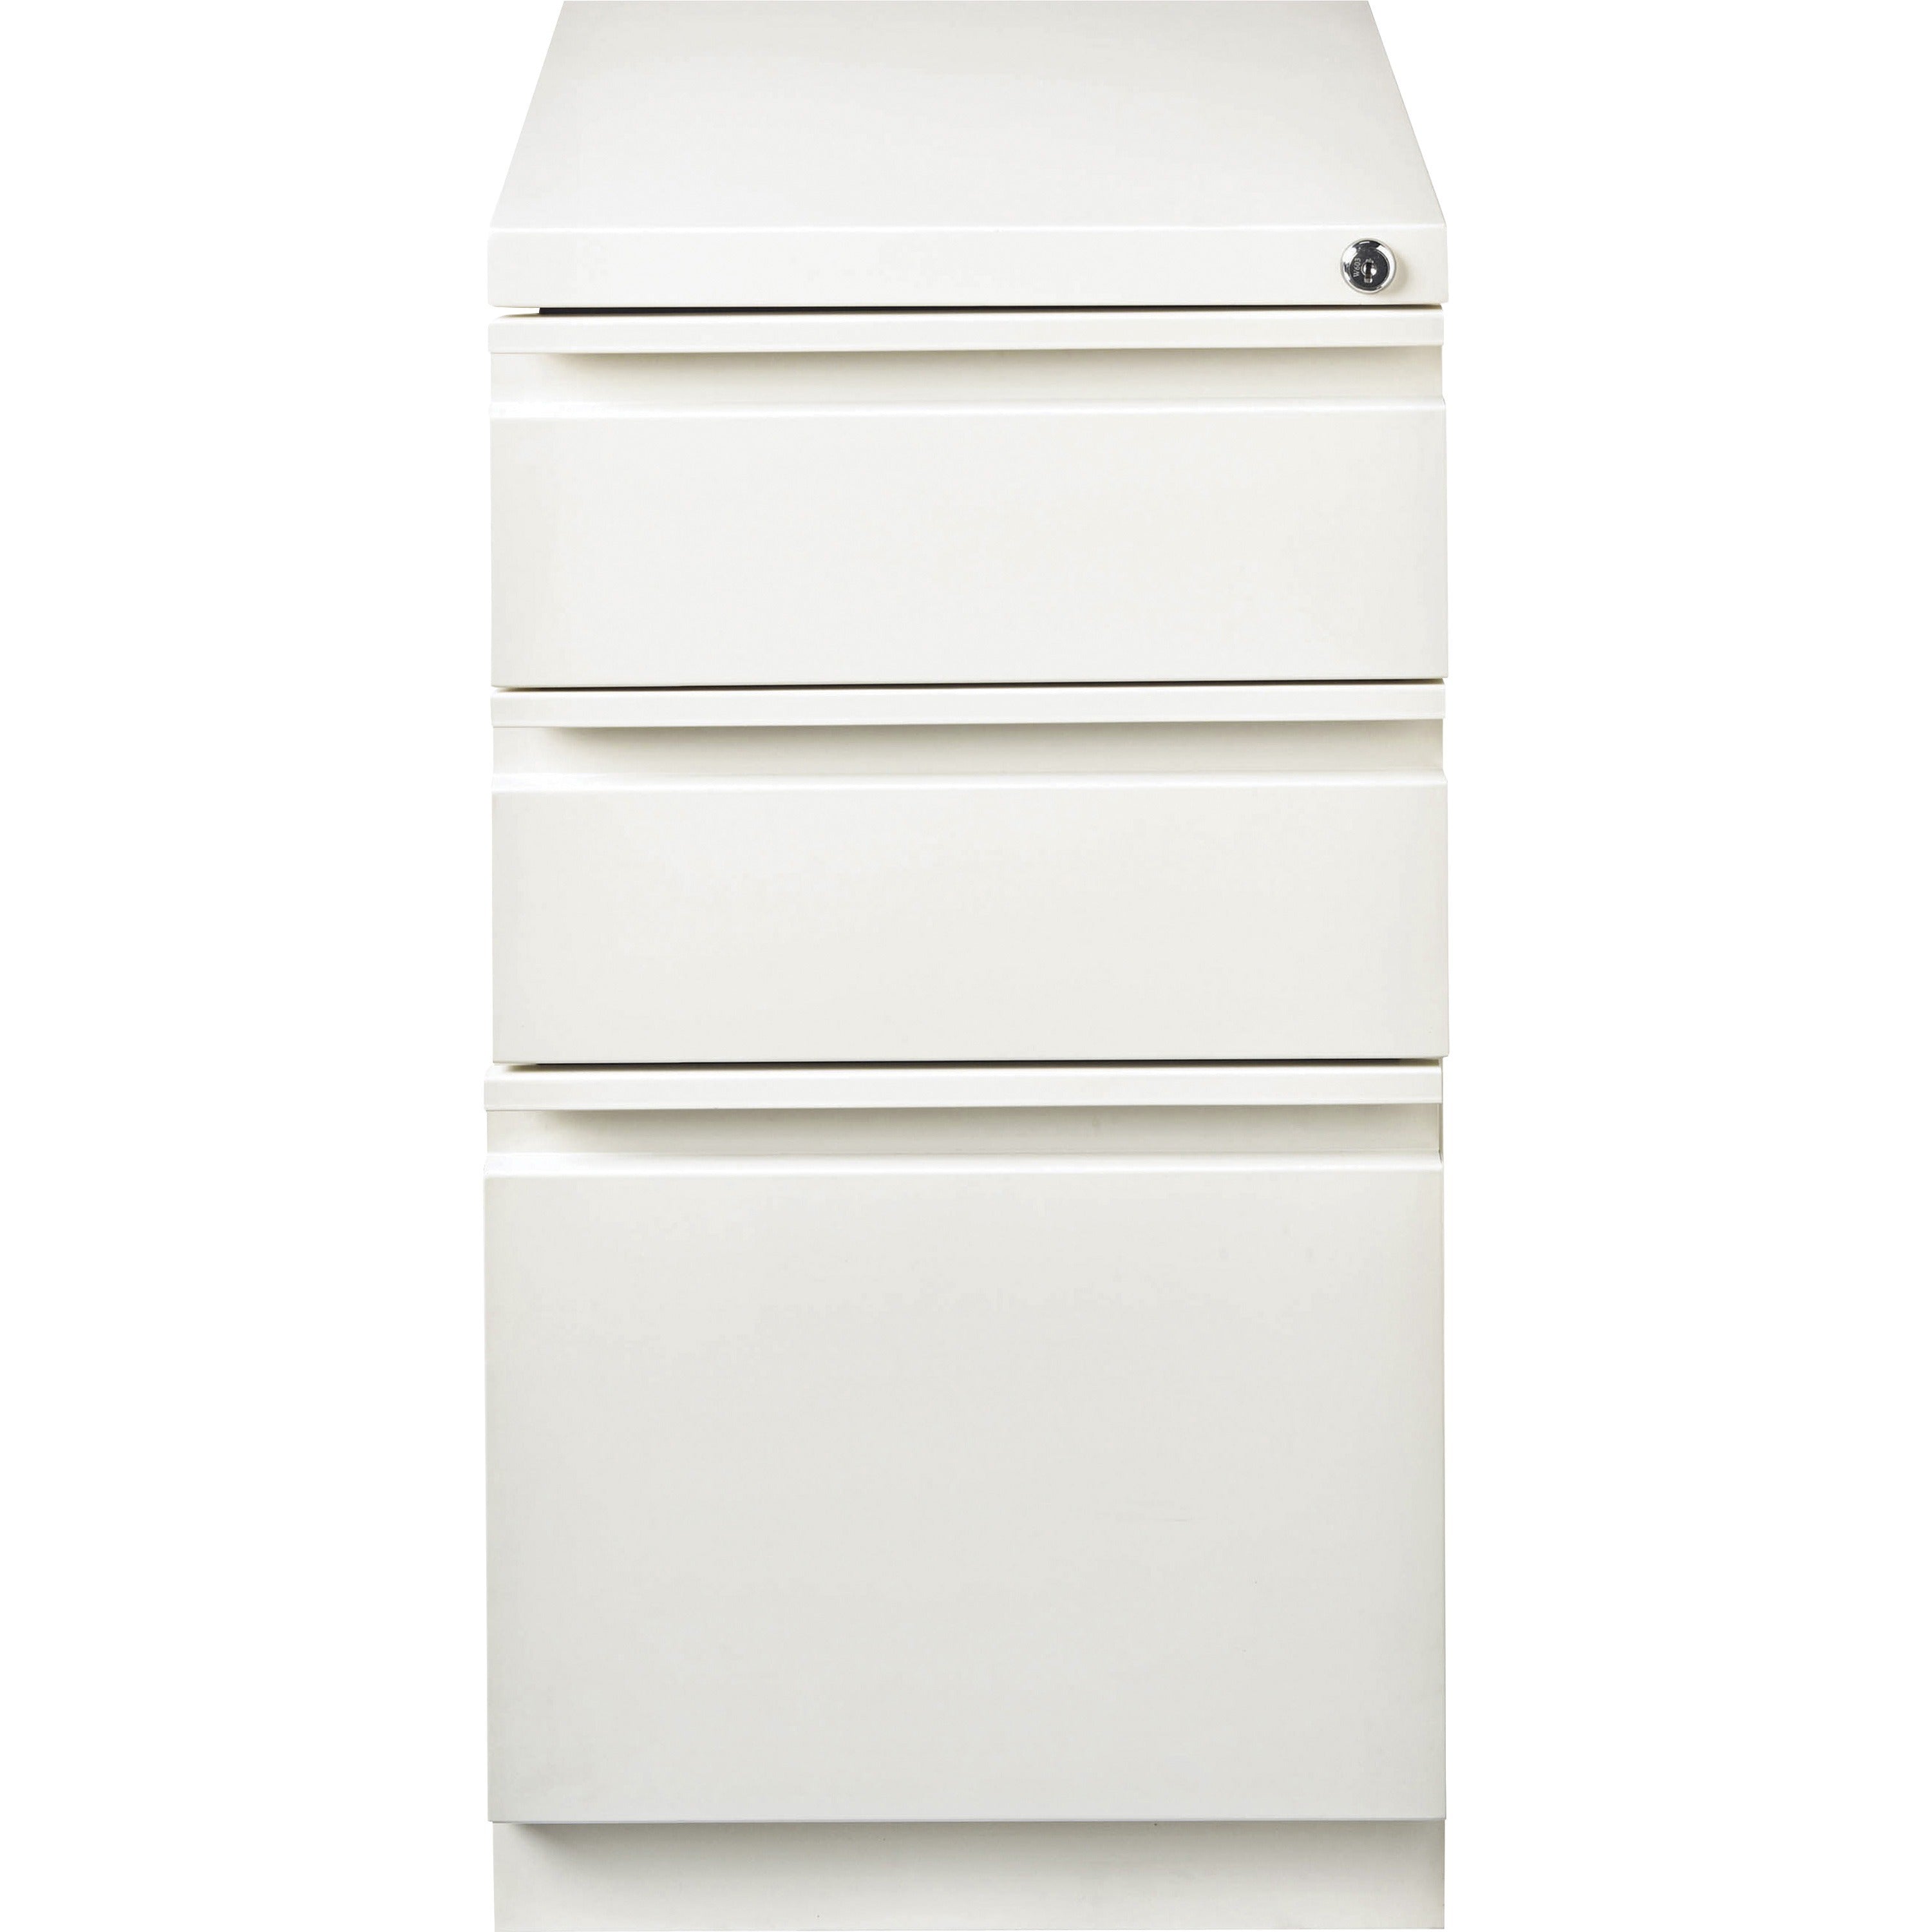 lorell-20-box-box-file-mobile-file-cabinet-with-full-width-pull-15-x-199-x-278-for-box-file-letter-vertical-mobility-ball-bearing-suspension-removable-lock-pull-out-drawer-recessed-drawer-casters-key-lock-white-powder-coated_llr00049 - 3